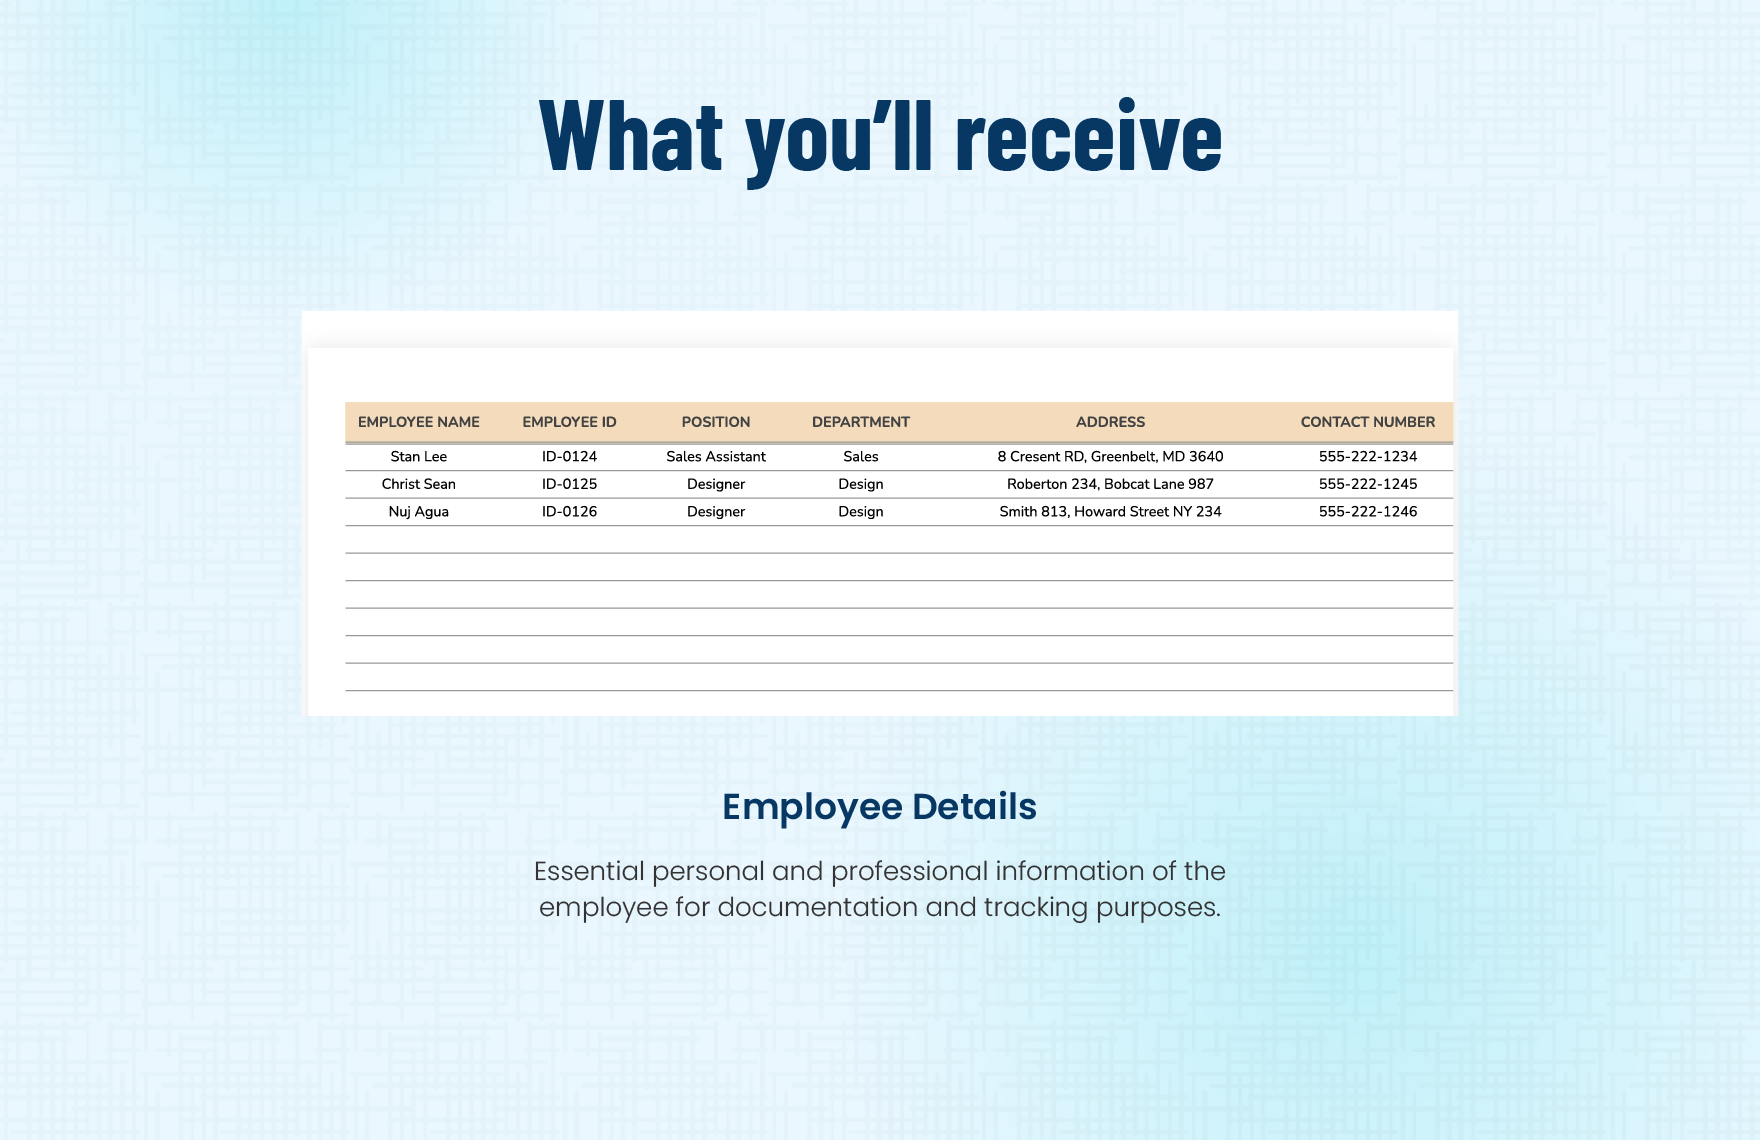 Overtime Form Template